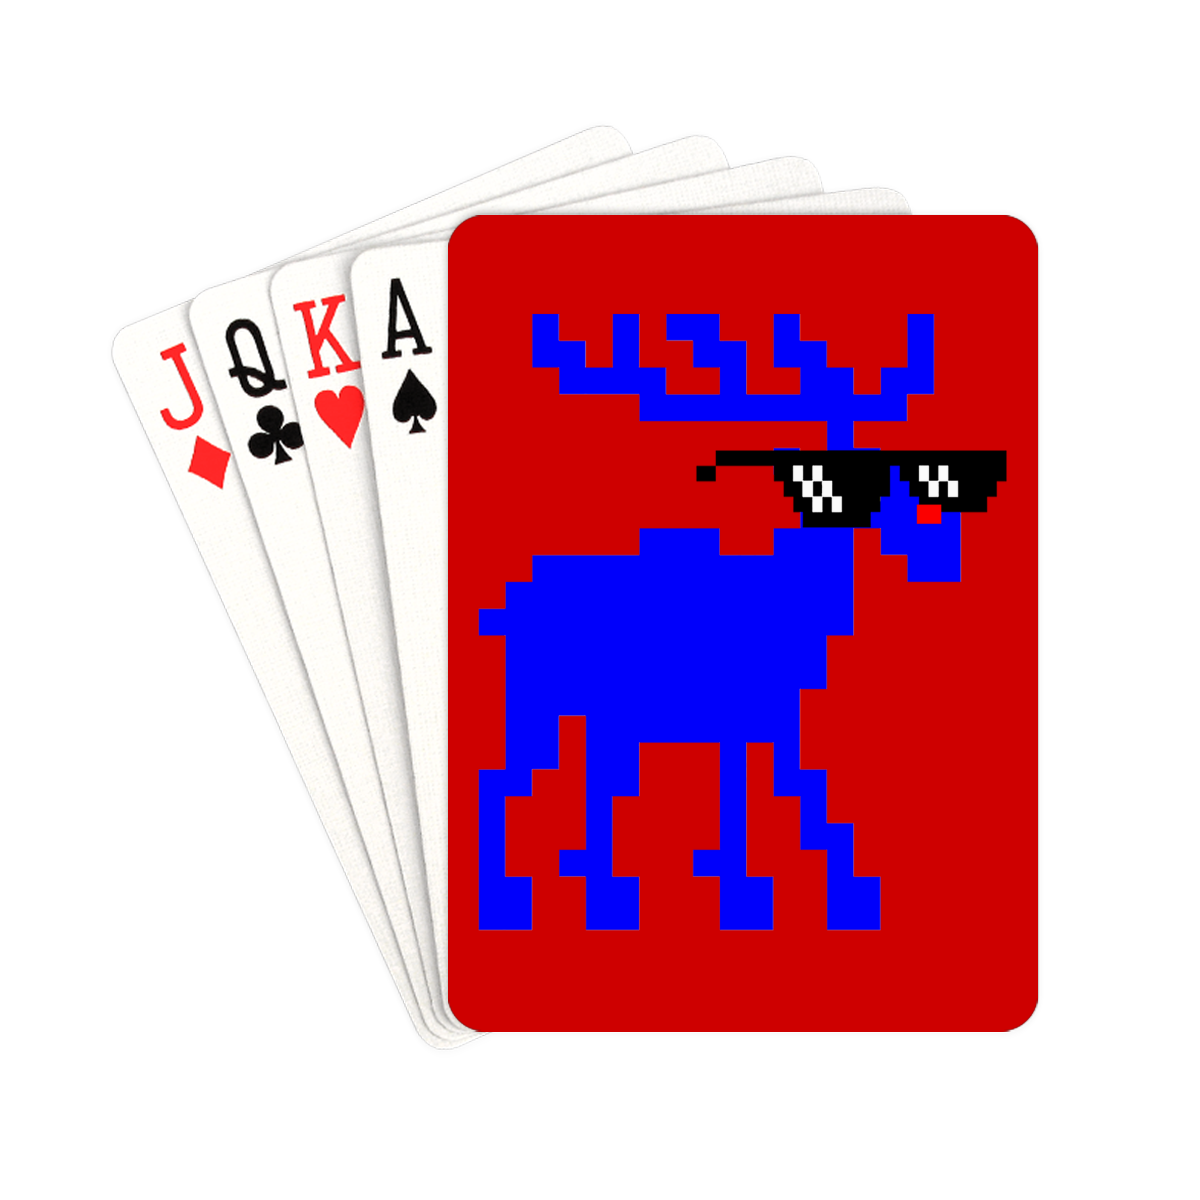 Christmas Ugly Sweater Reindeer (Deal With It) on Red Playing Cards 2.5"x3.5"